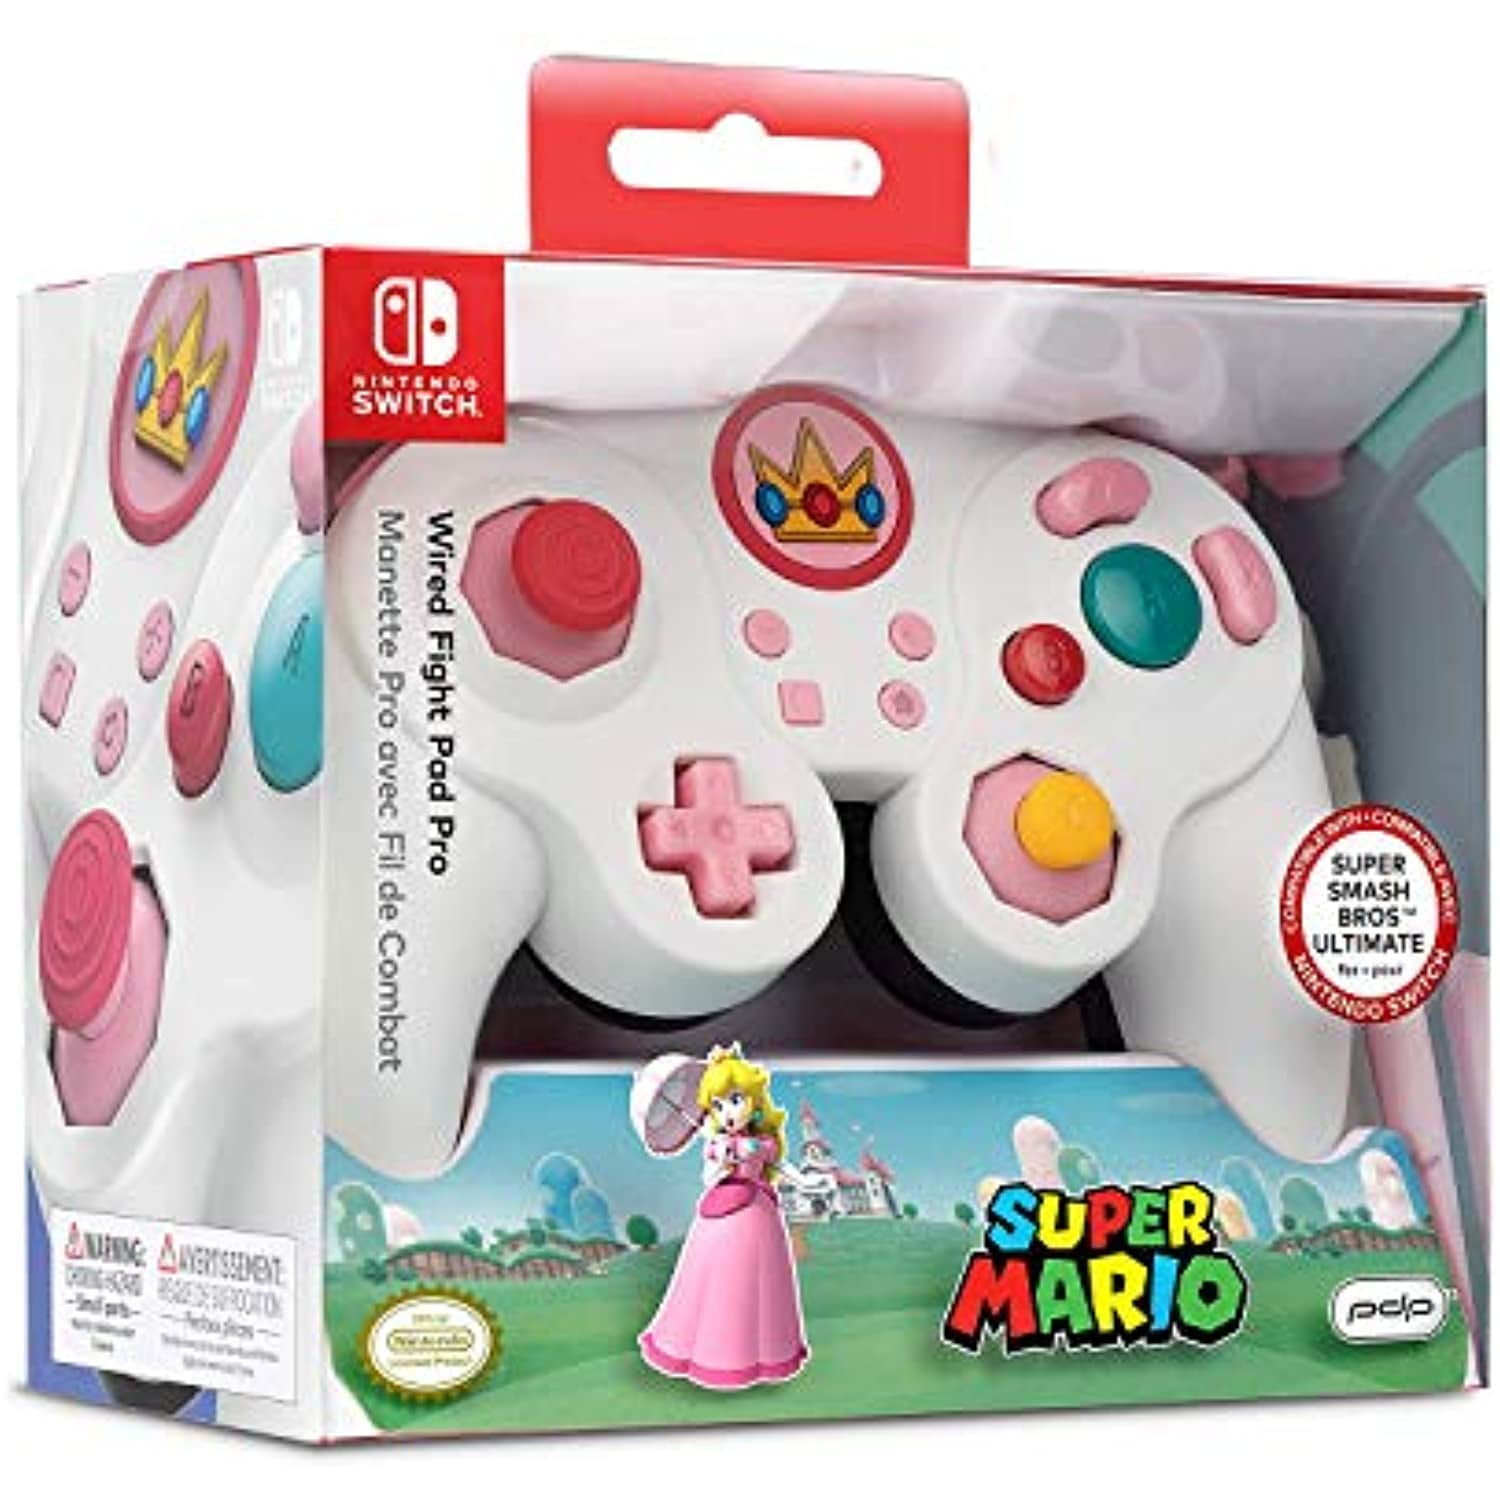 Nintendo Switch Super Bros Princess Peach GameCube Style Wired Fight Pad Pro Controller by 500-100-NA-D5 | Walmart Canada